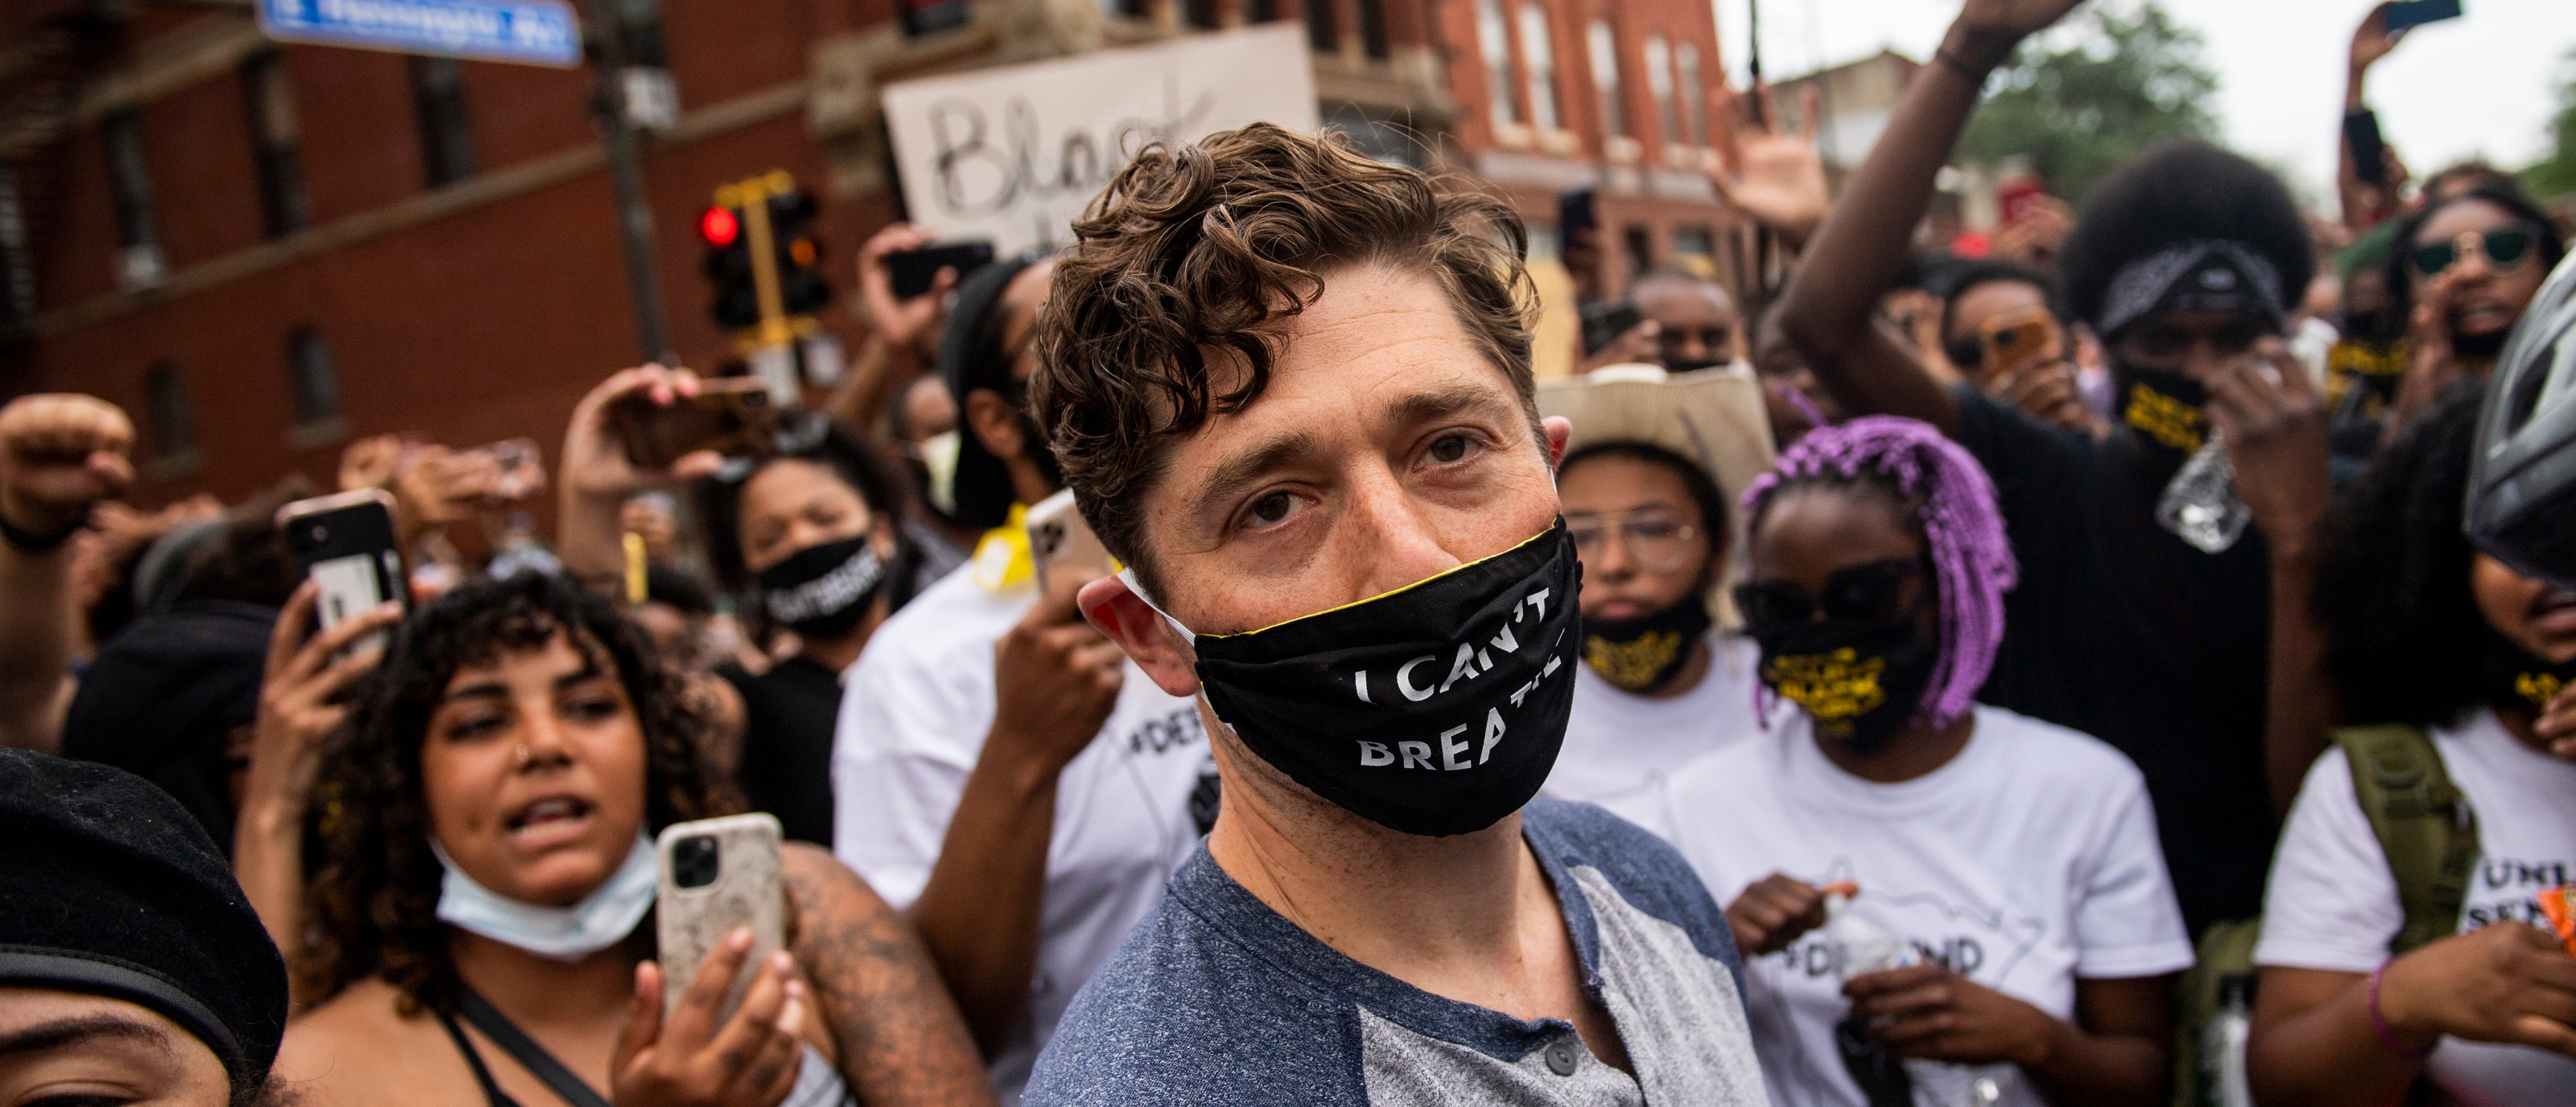 Minneapolis Mayor Jacob Frey leaves after coming out of his home to speak during a demonstration calling for the Minneapolis Police Department to be defunded on June 6, 2020 in Minneapolis, Minnesota. Mayor Frey declined when he was asked if he would fully defund the police and was then asked to leave the protest. (Photo by Stephen Maturen/Getty Images)